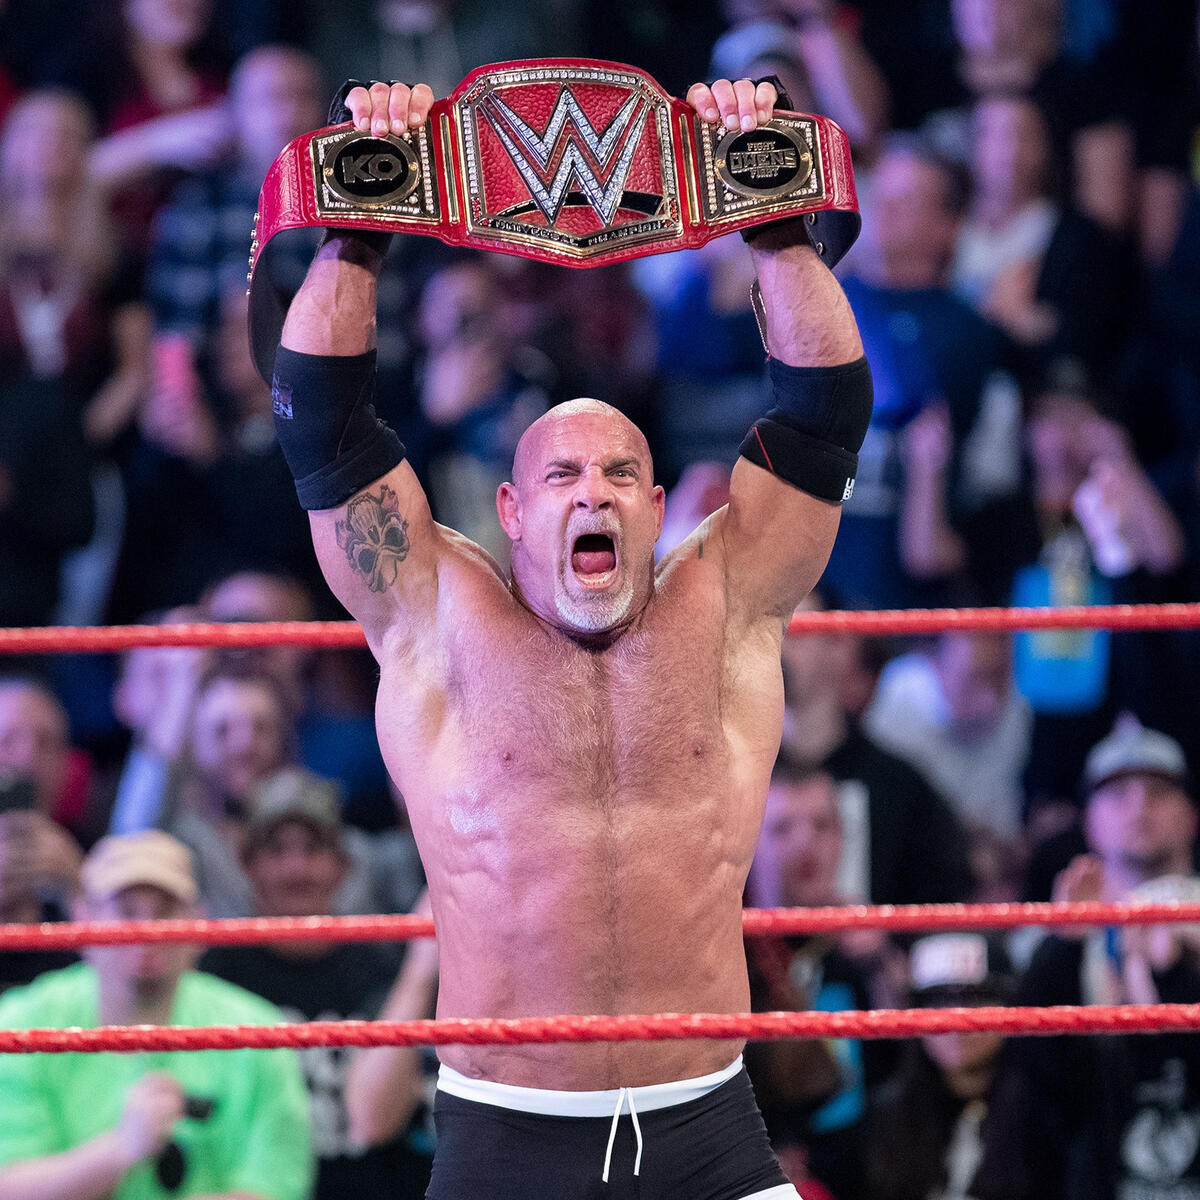 When Goldberg defeated Kevin Owens to capture the WWE Universal Championship